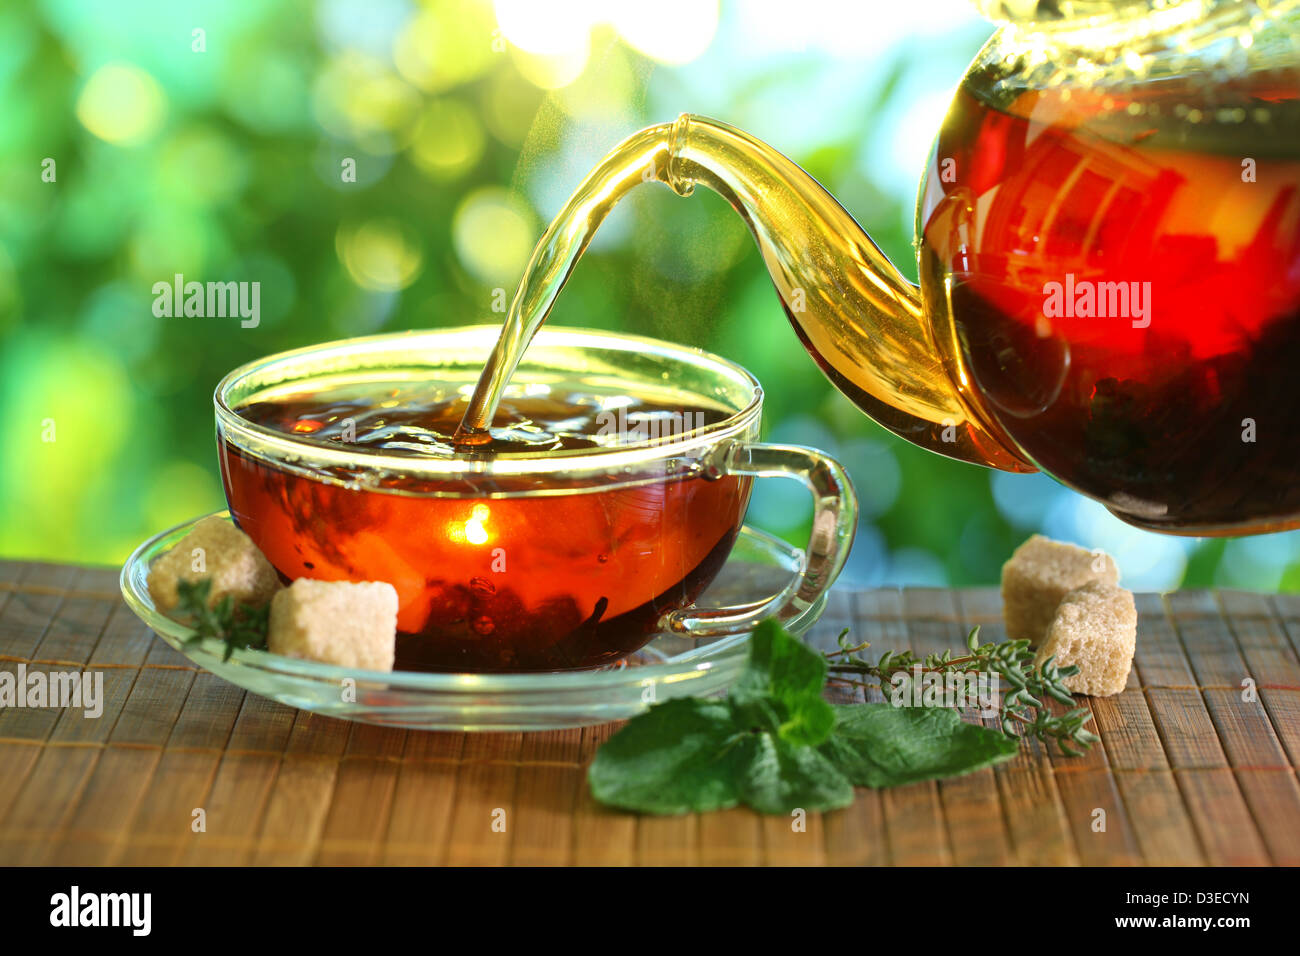 Pouring tea from a teapot into a cup on a blurred background of nature. Stock Photo